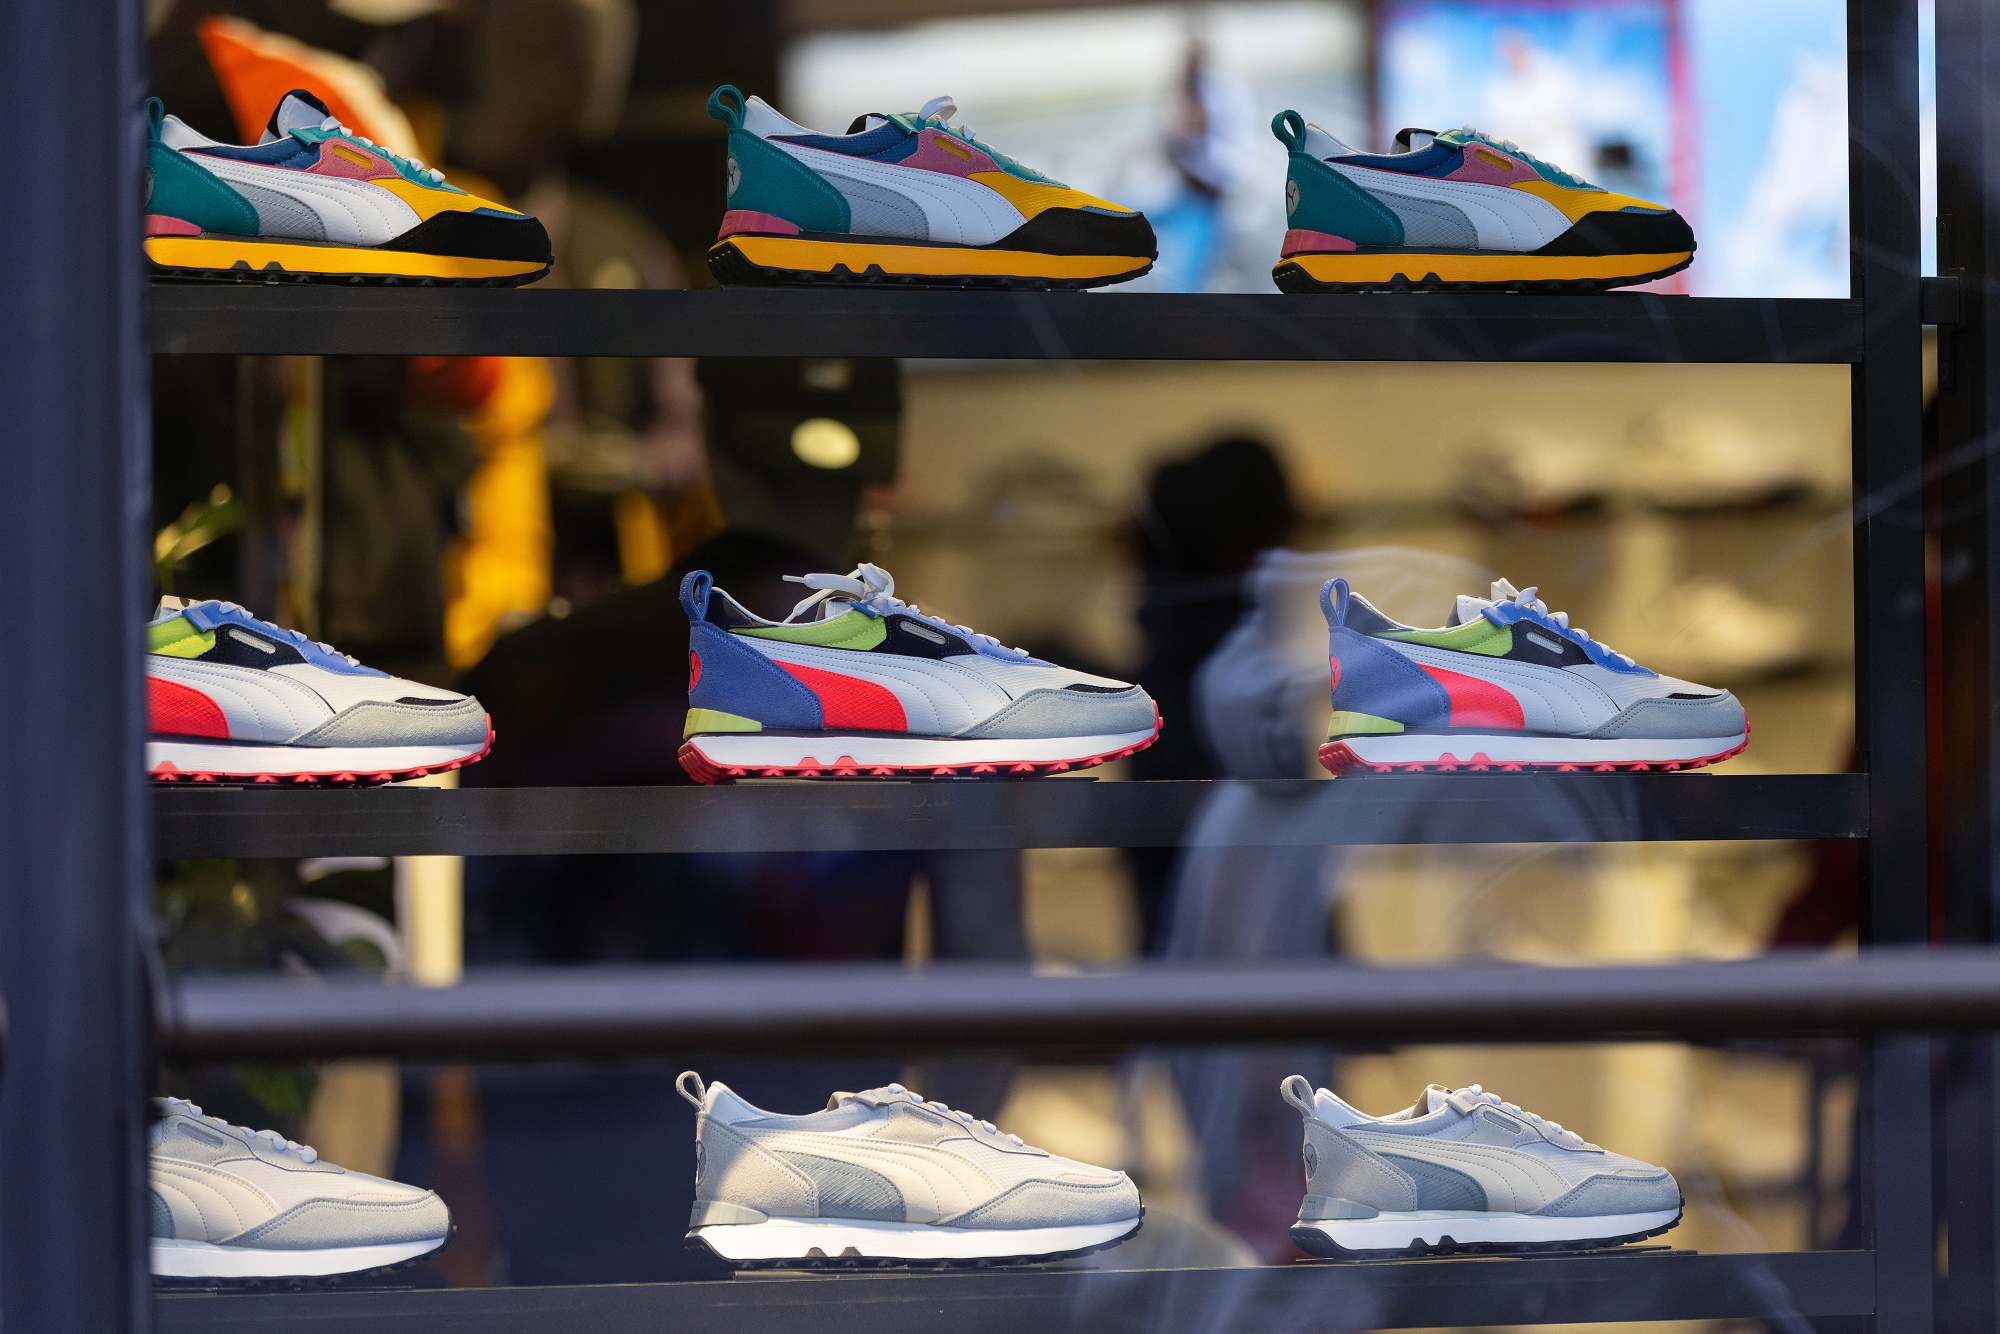 Kering might be considering Puma's sale